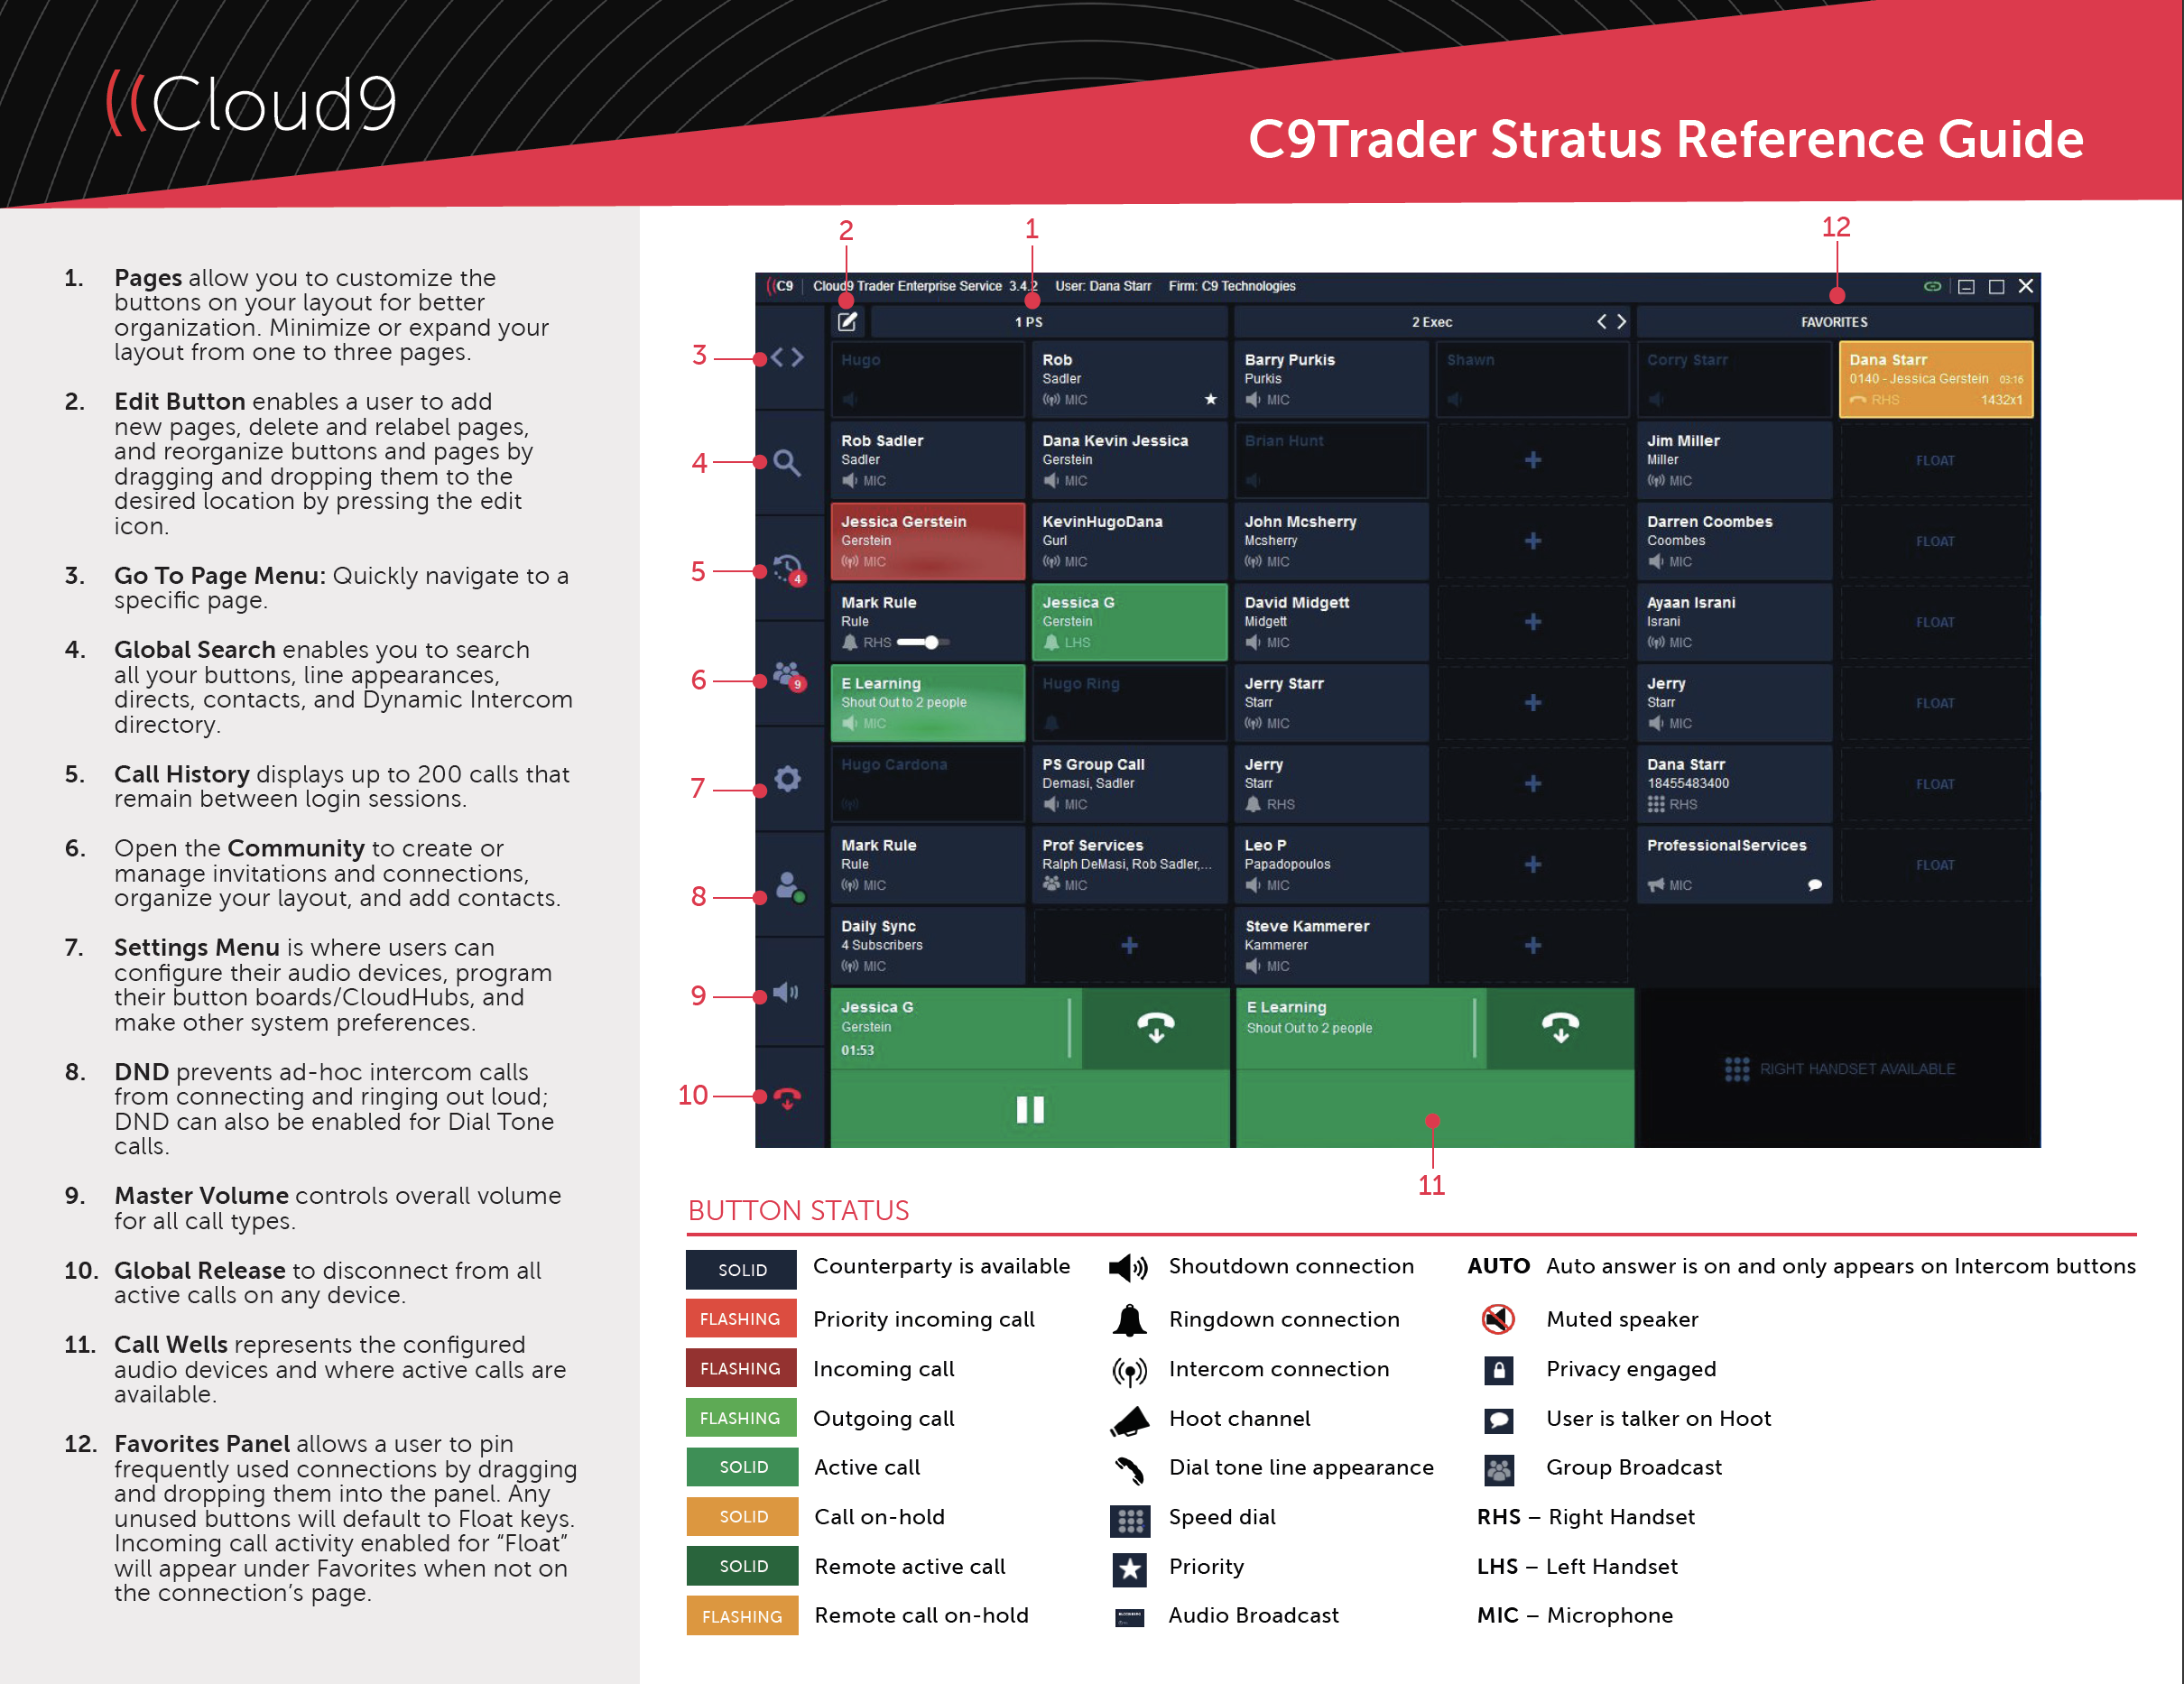 C9Trader Stratus Reference Guide